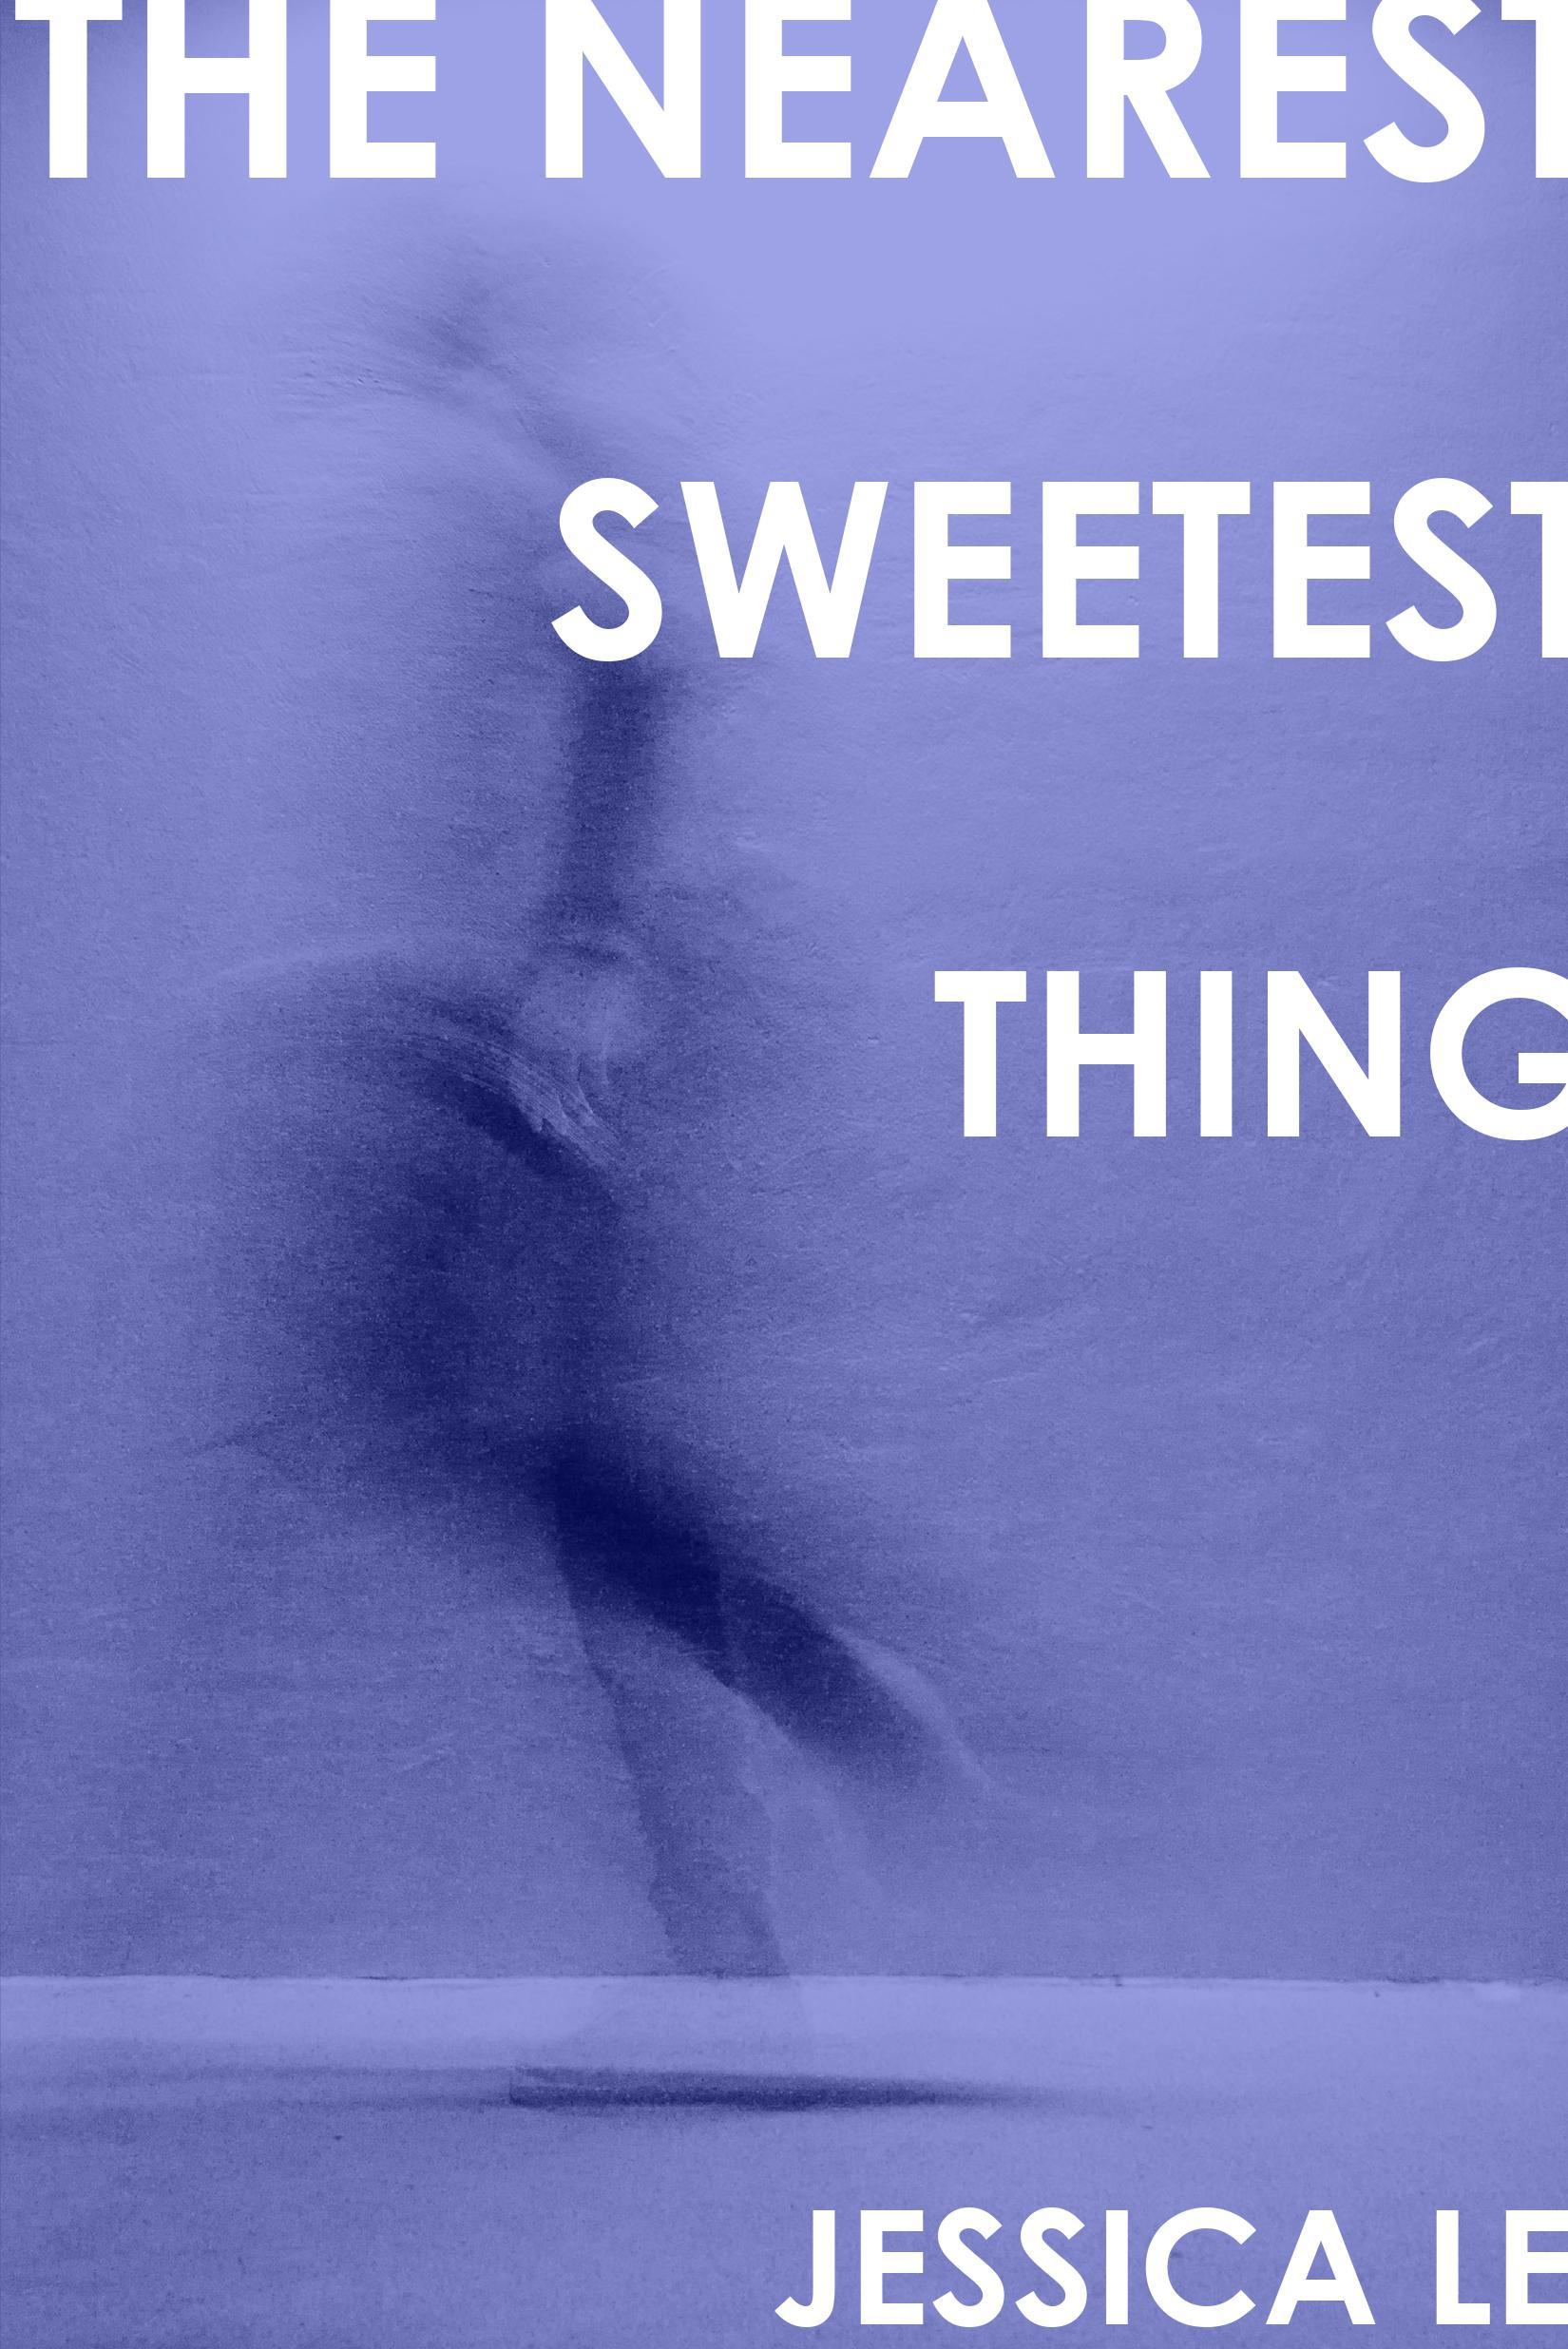 Book cover of The Nearest Sweetest Thing by jess